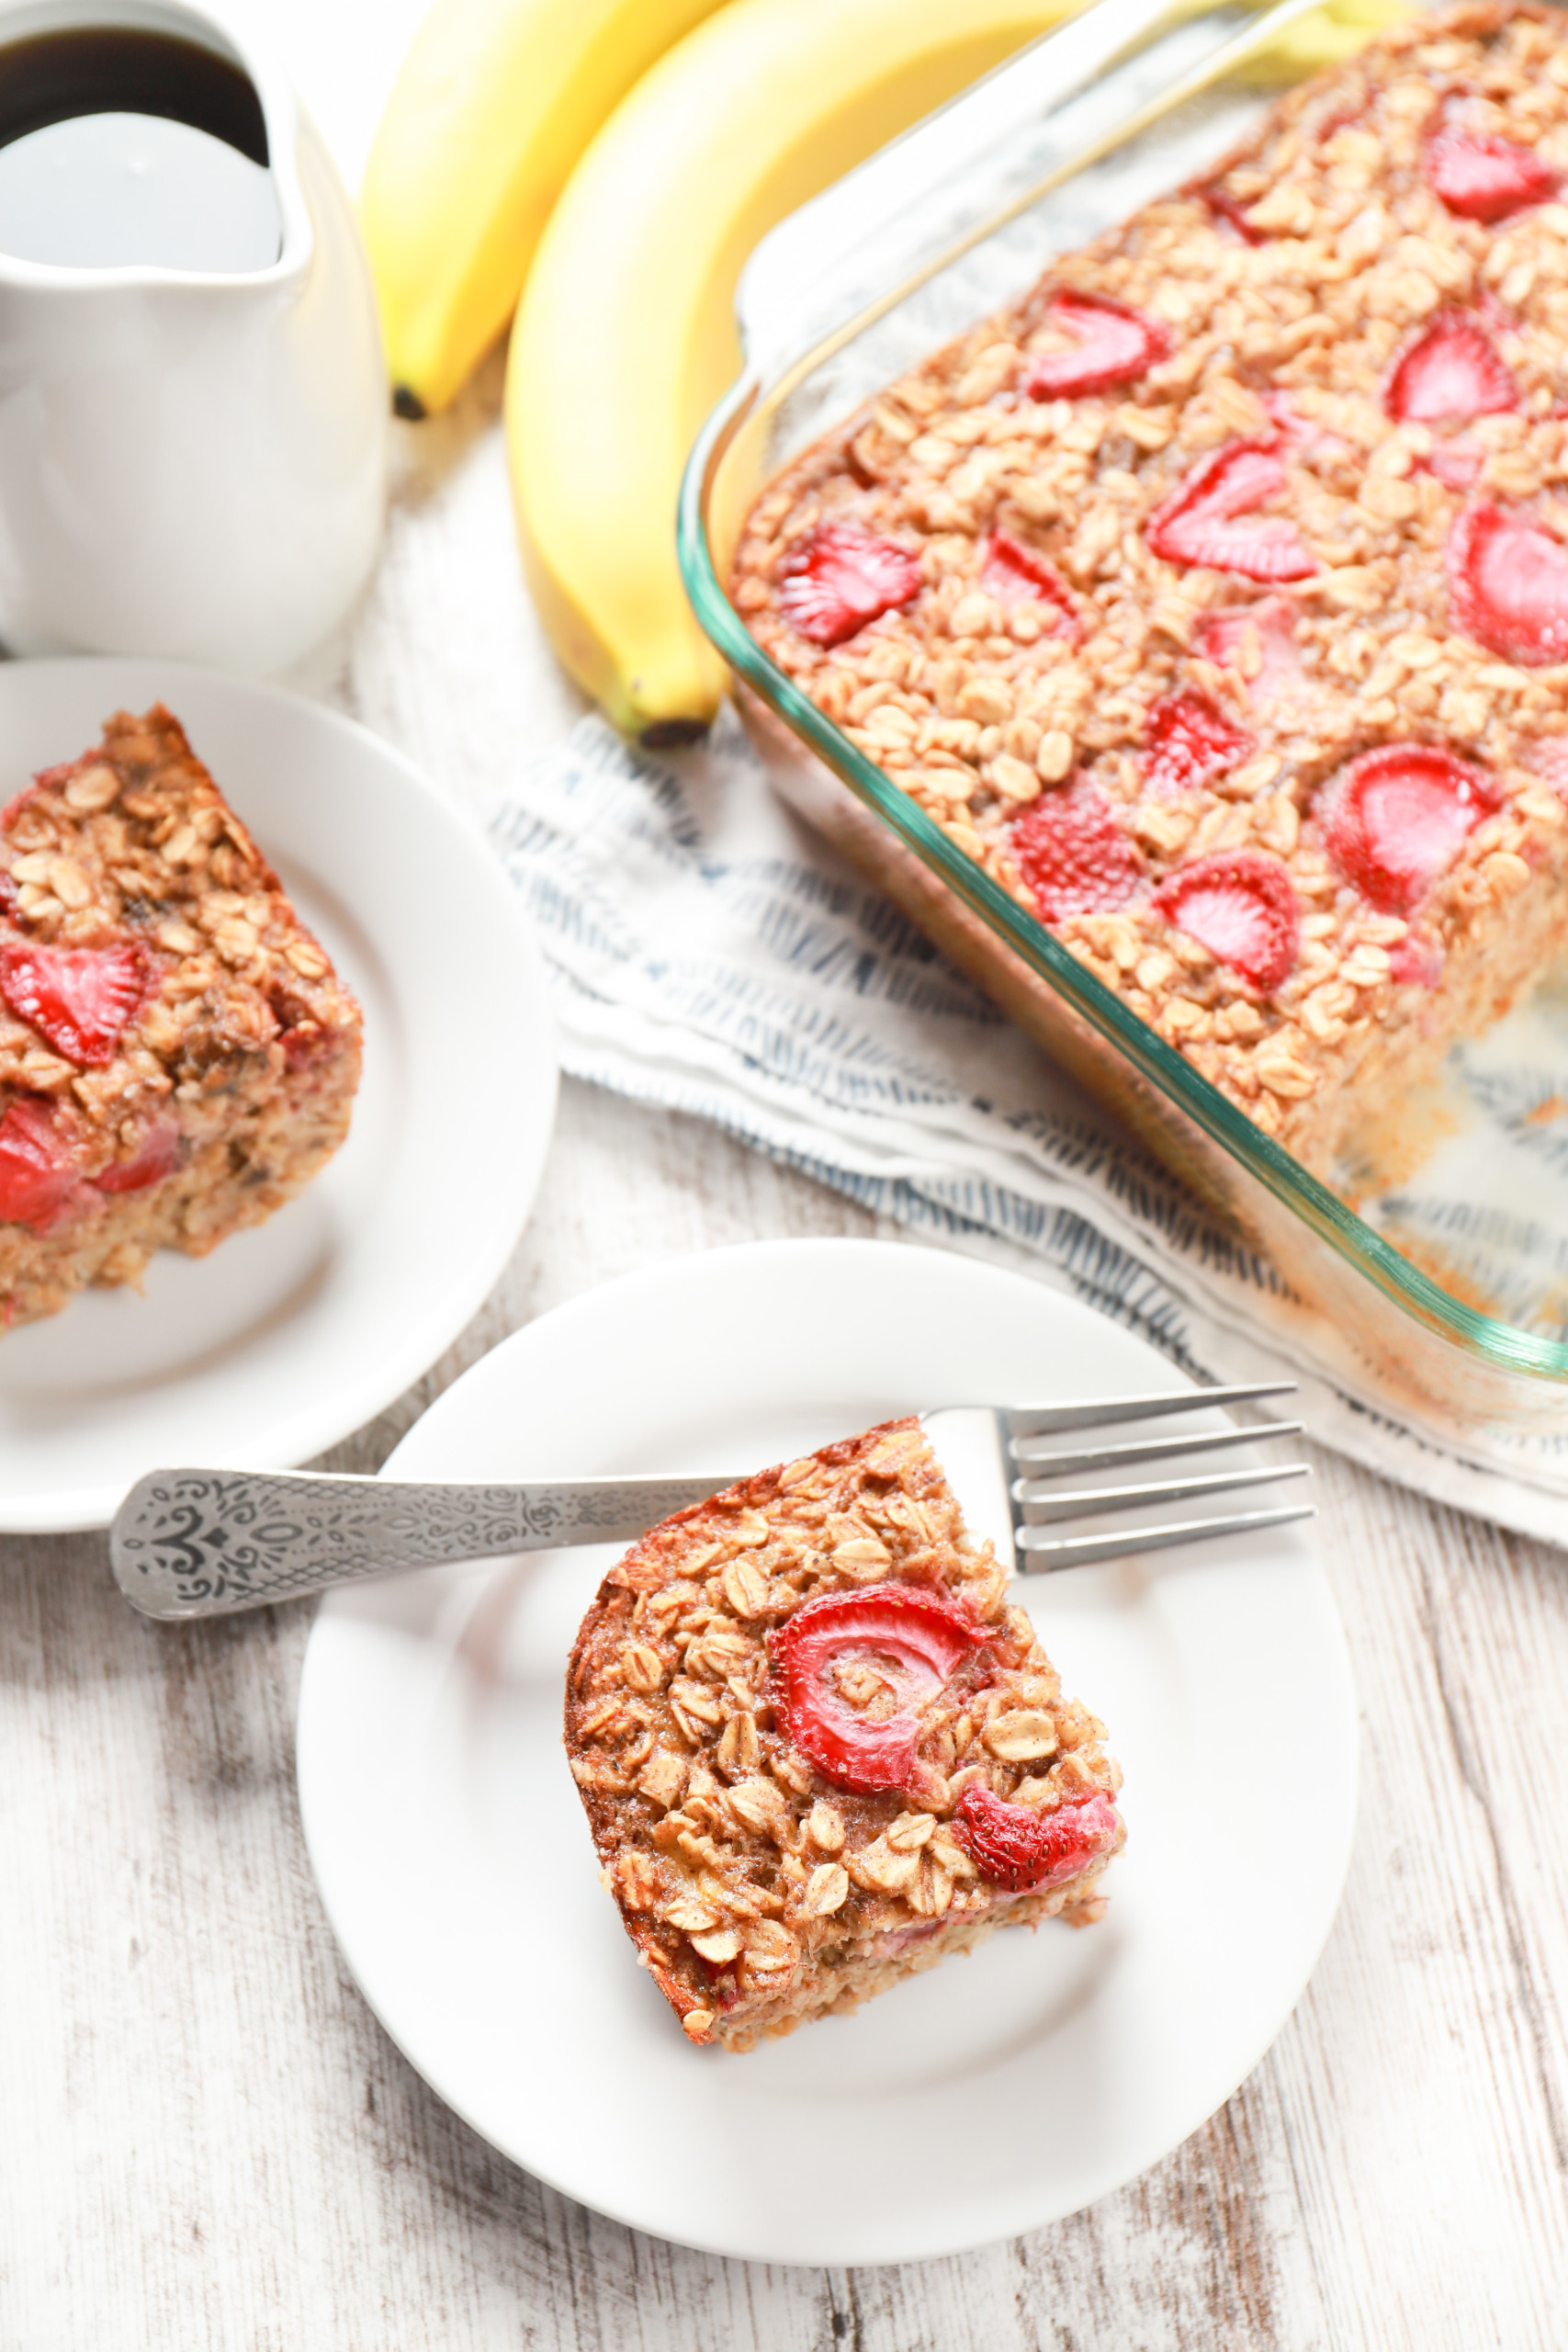 Overhead view of two pieces of strawberry banana bread baked oatmeal on small white plate with the remaining oatmeal in the background.